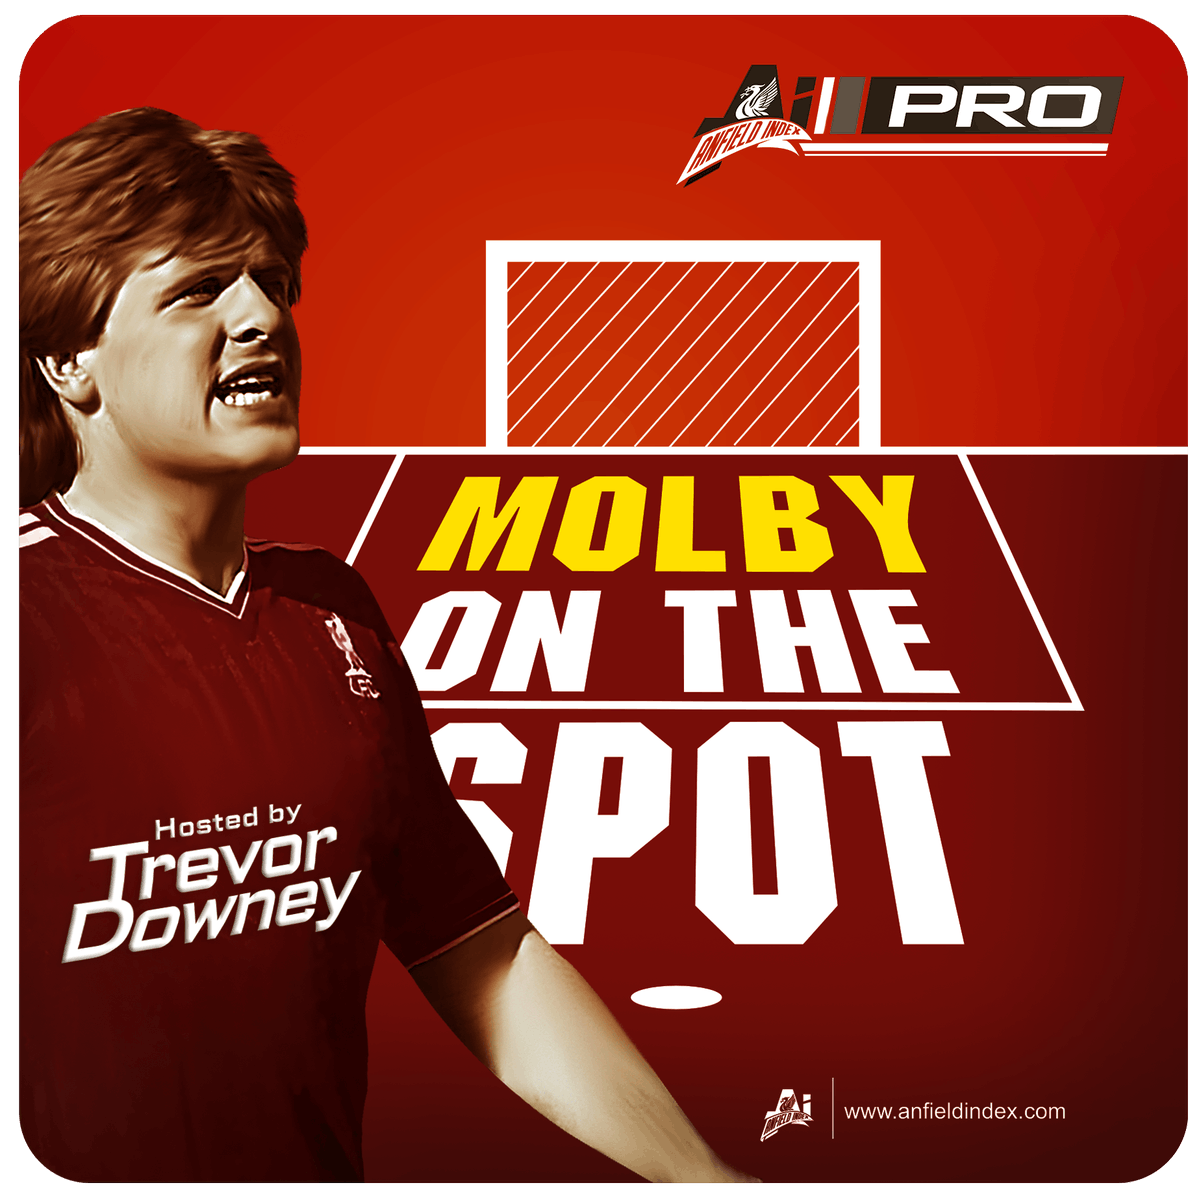 It's Been Emotional: Molby On The Spot